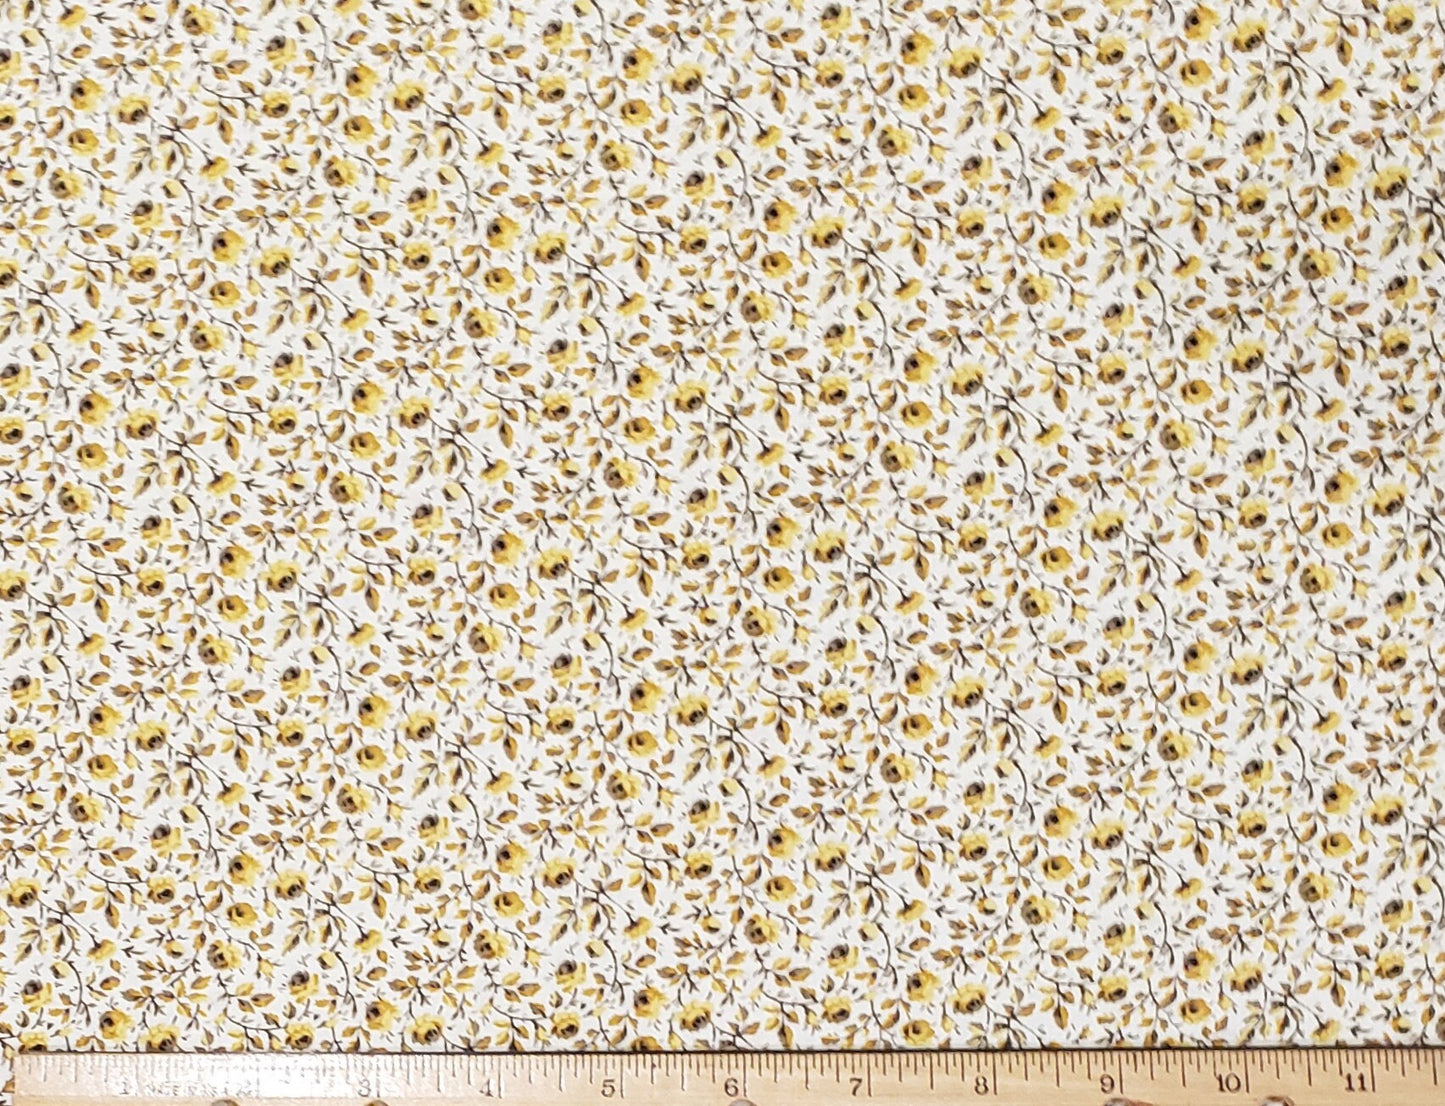 Classic Cottons - Soft White Fabric / Golden Yellow Flower Pattern with Dark Brown Stems